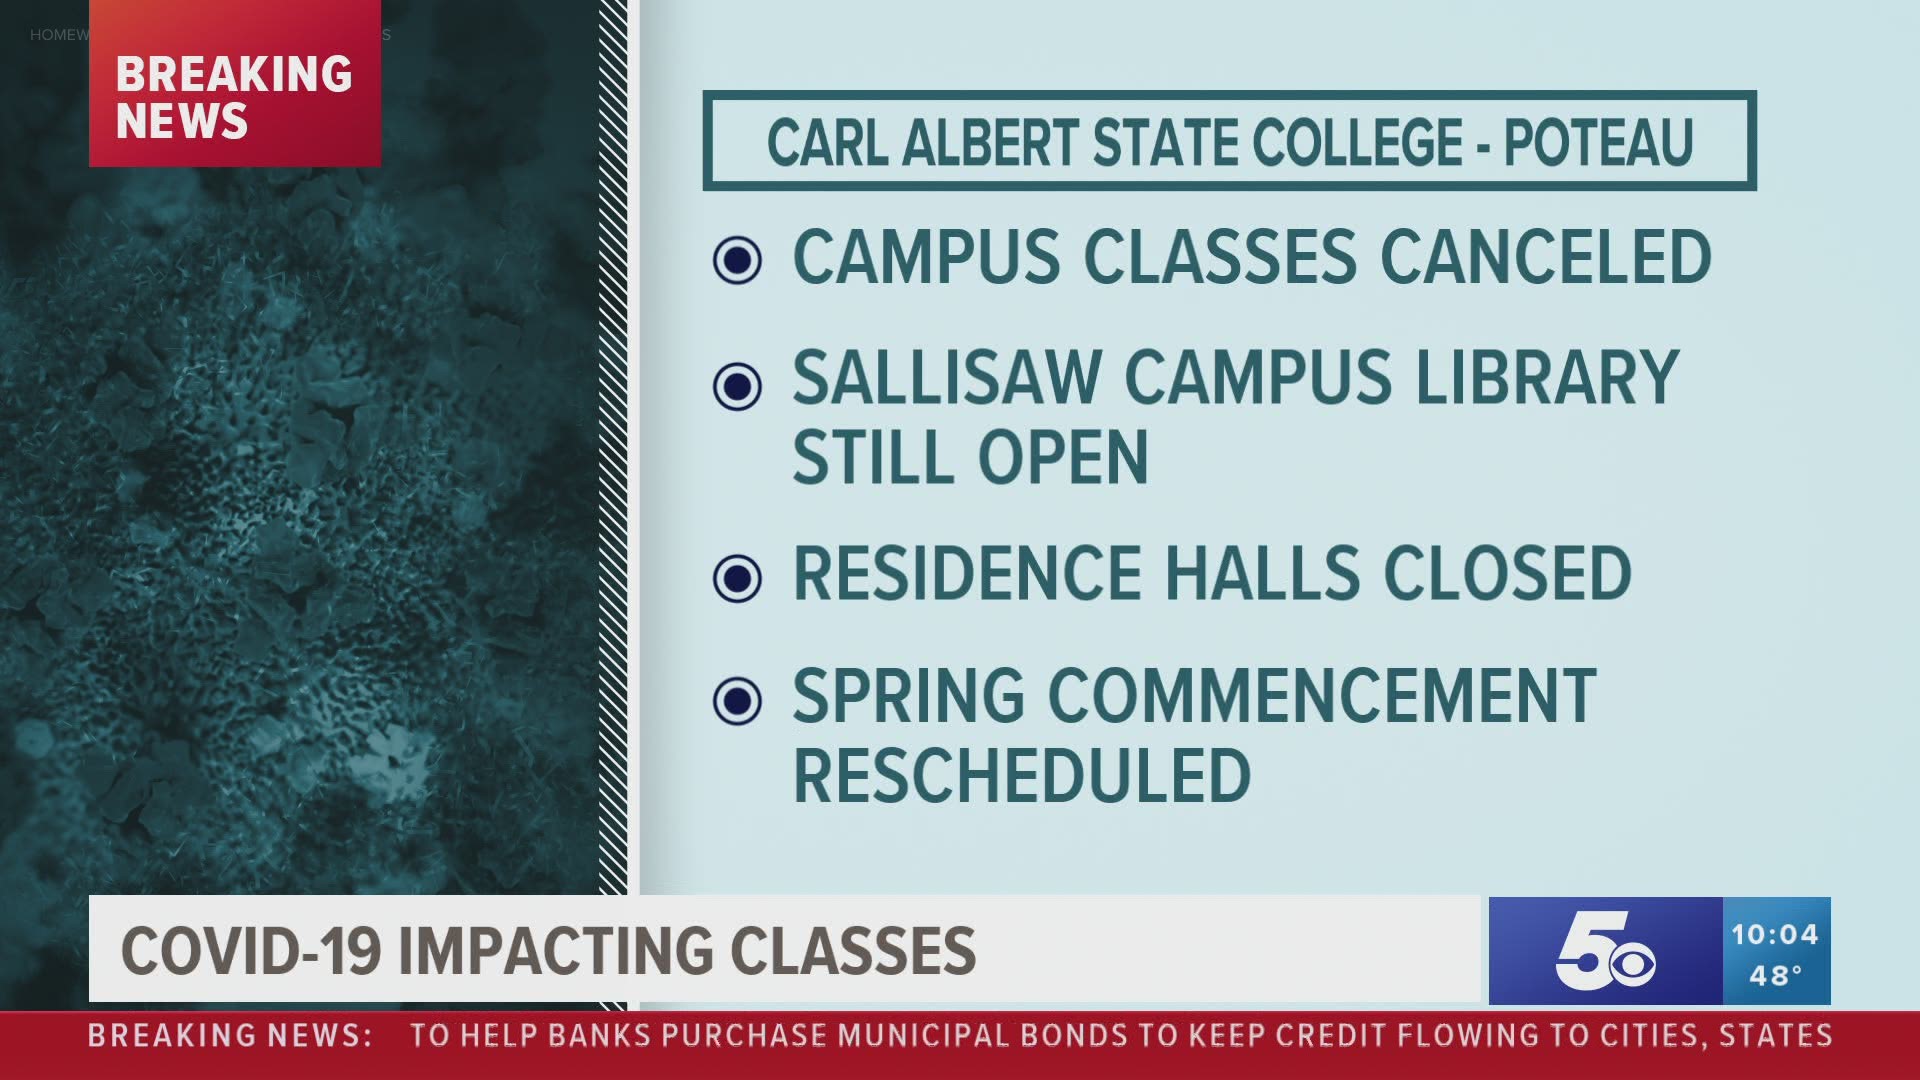 Carl Albert State College canceling on-campus classes